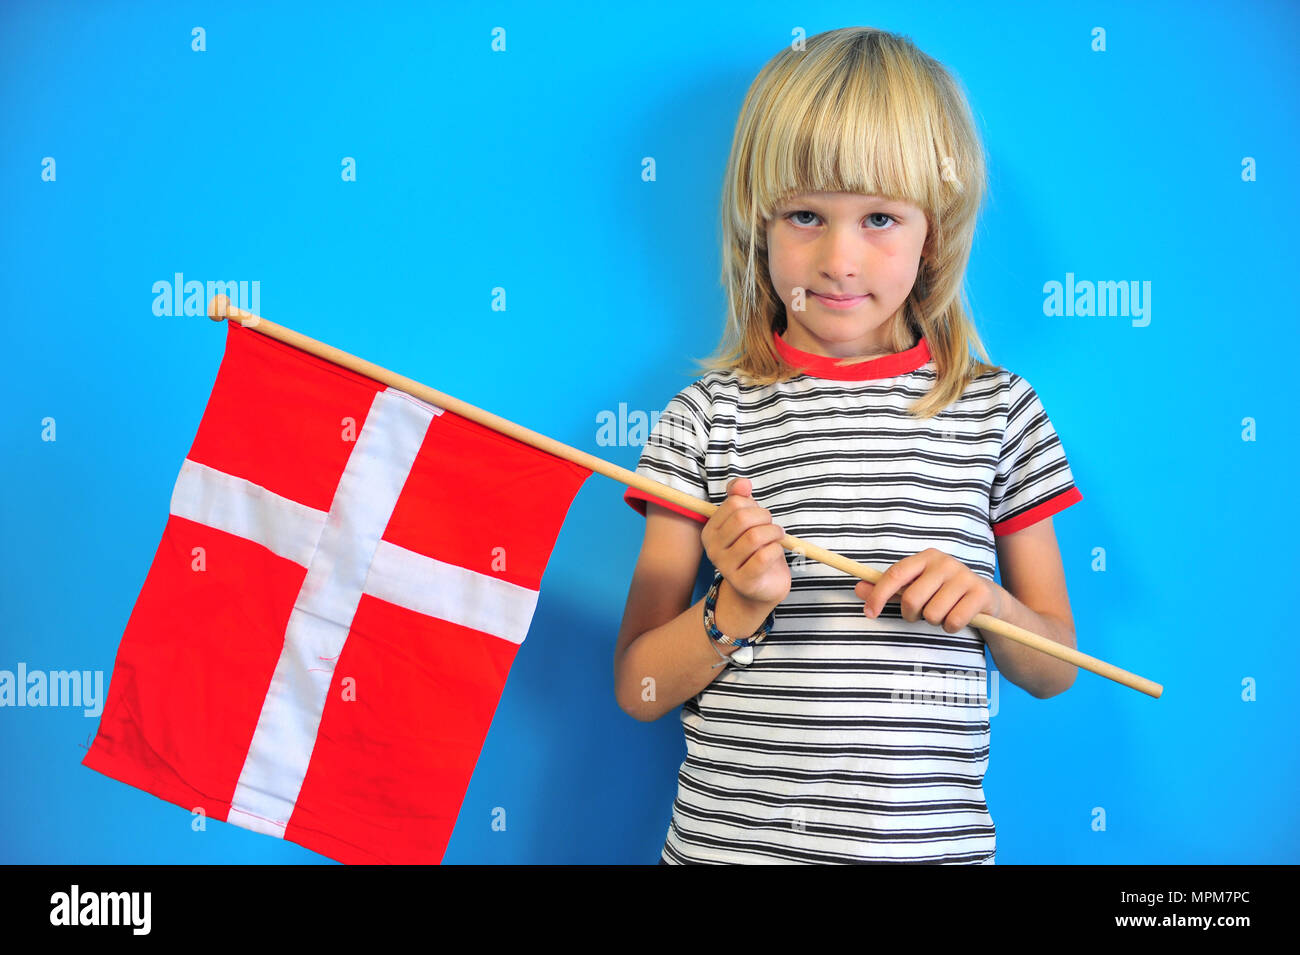 Portrait of a boy with national flag of Denmark Stock Photo